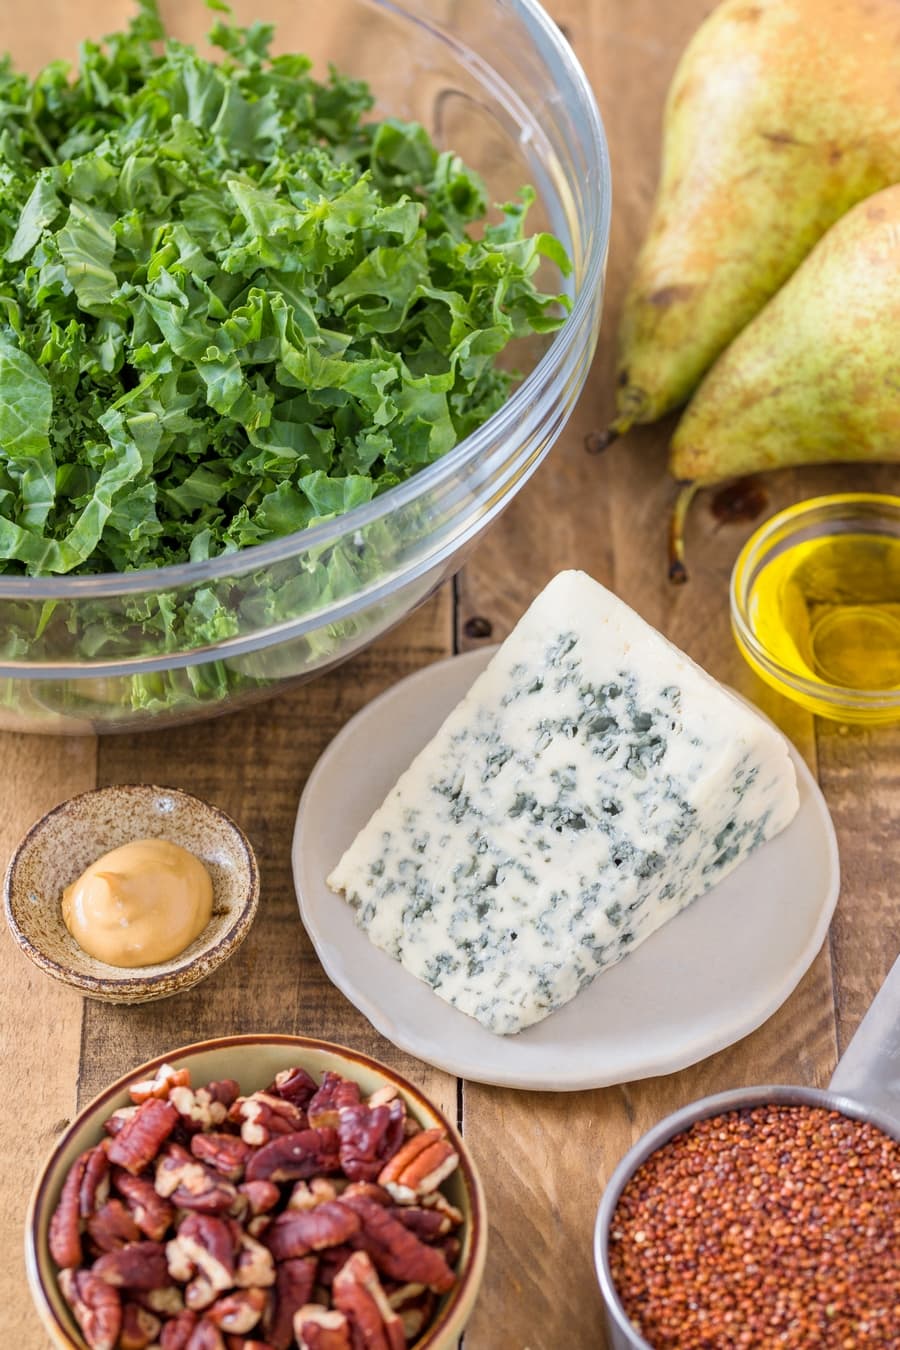 A block of blue cheese surronded by kale, pecans, pears, quinoa and condiments in bowls.